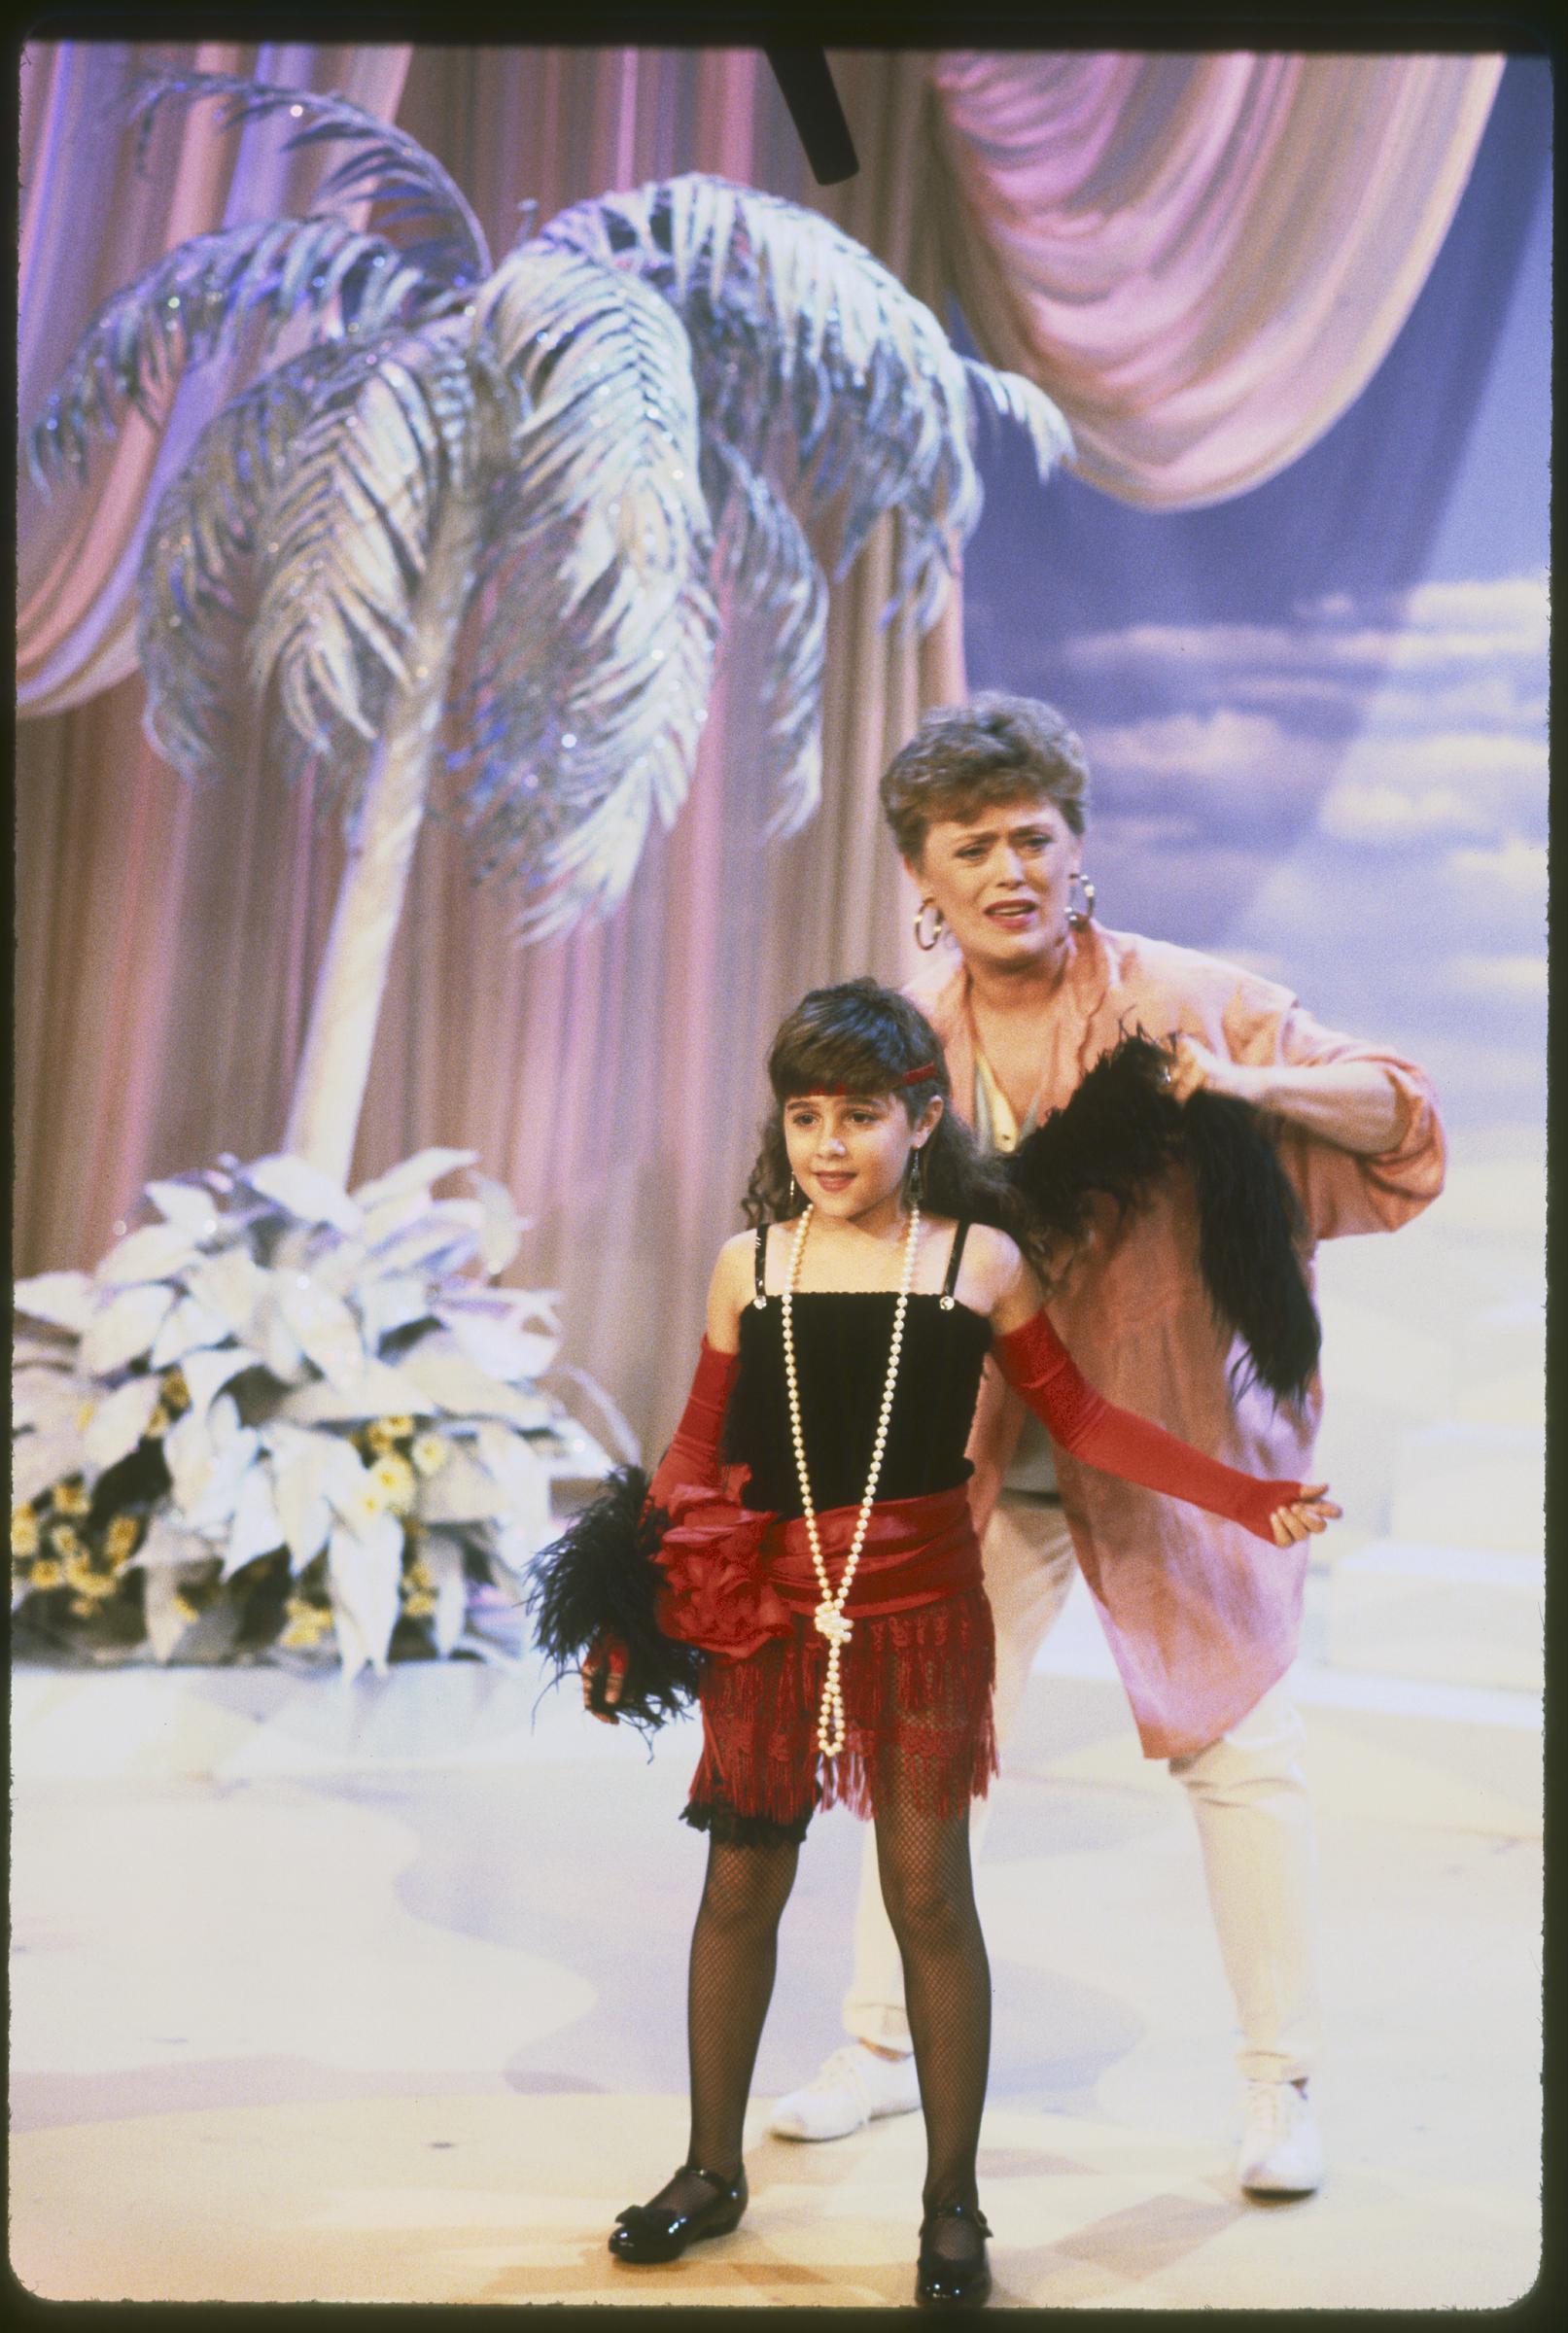 Rue McClanahan and the child star on "The Golden Girls" in 1992. | Source: Getty Images